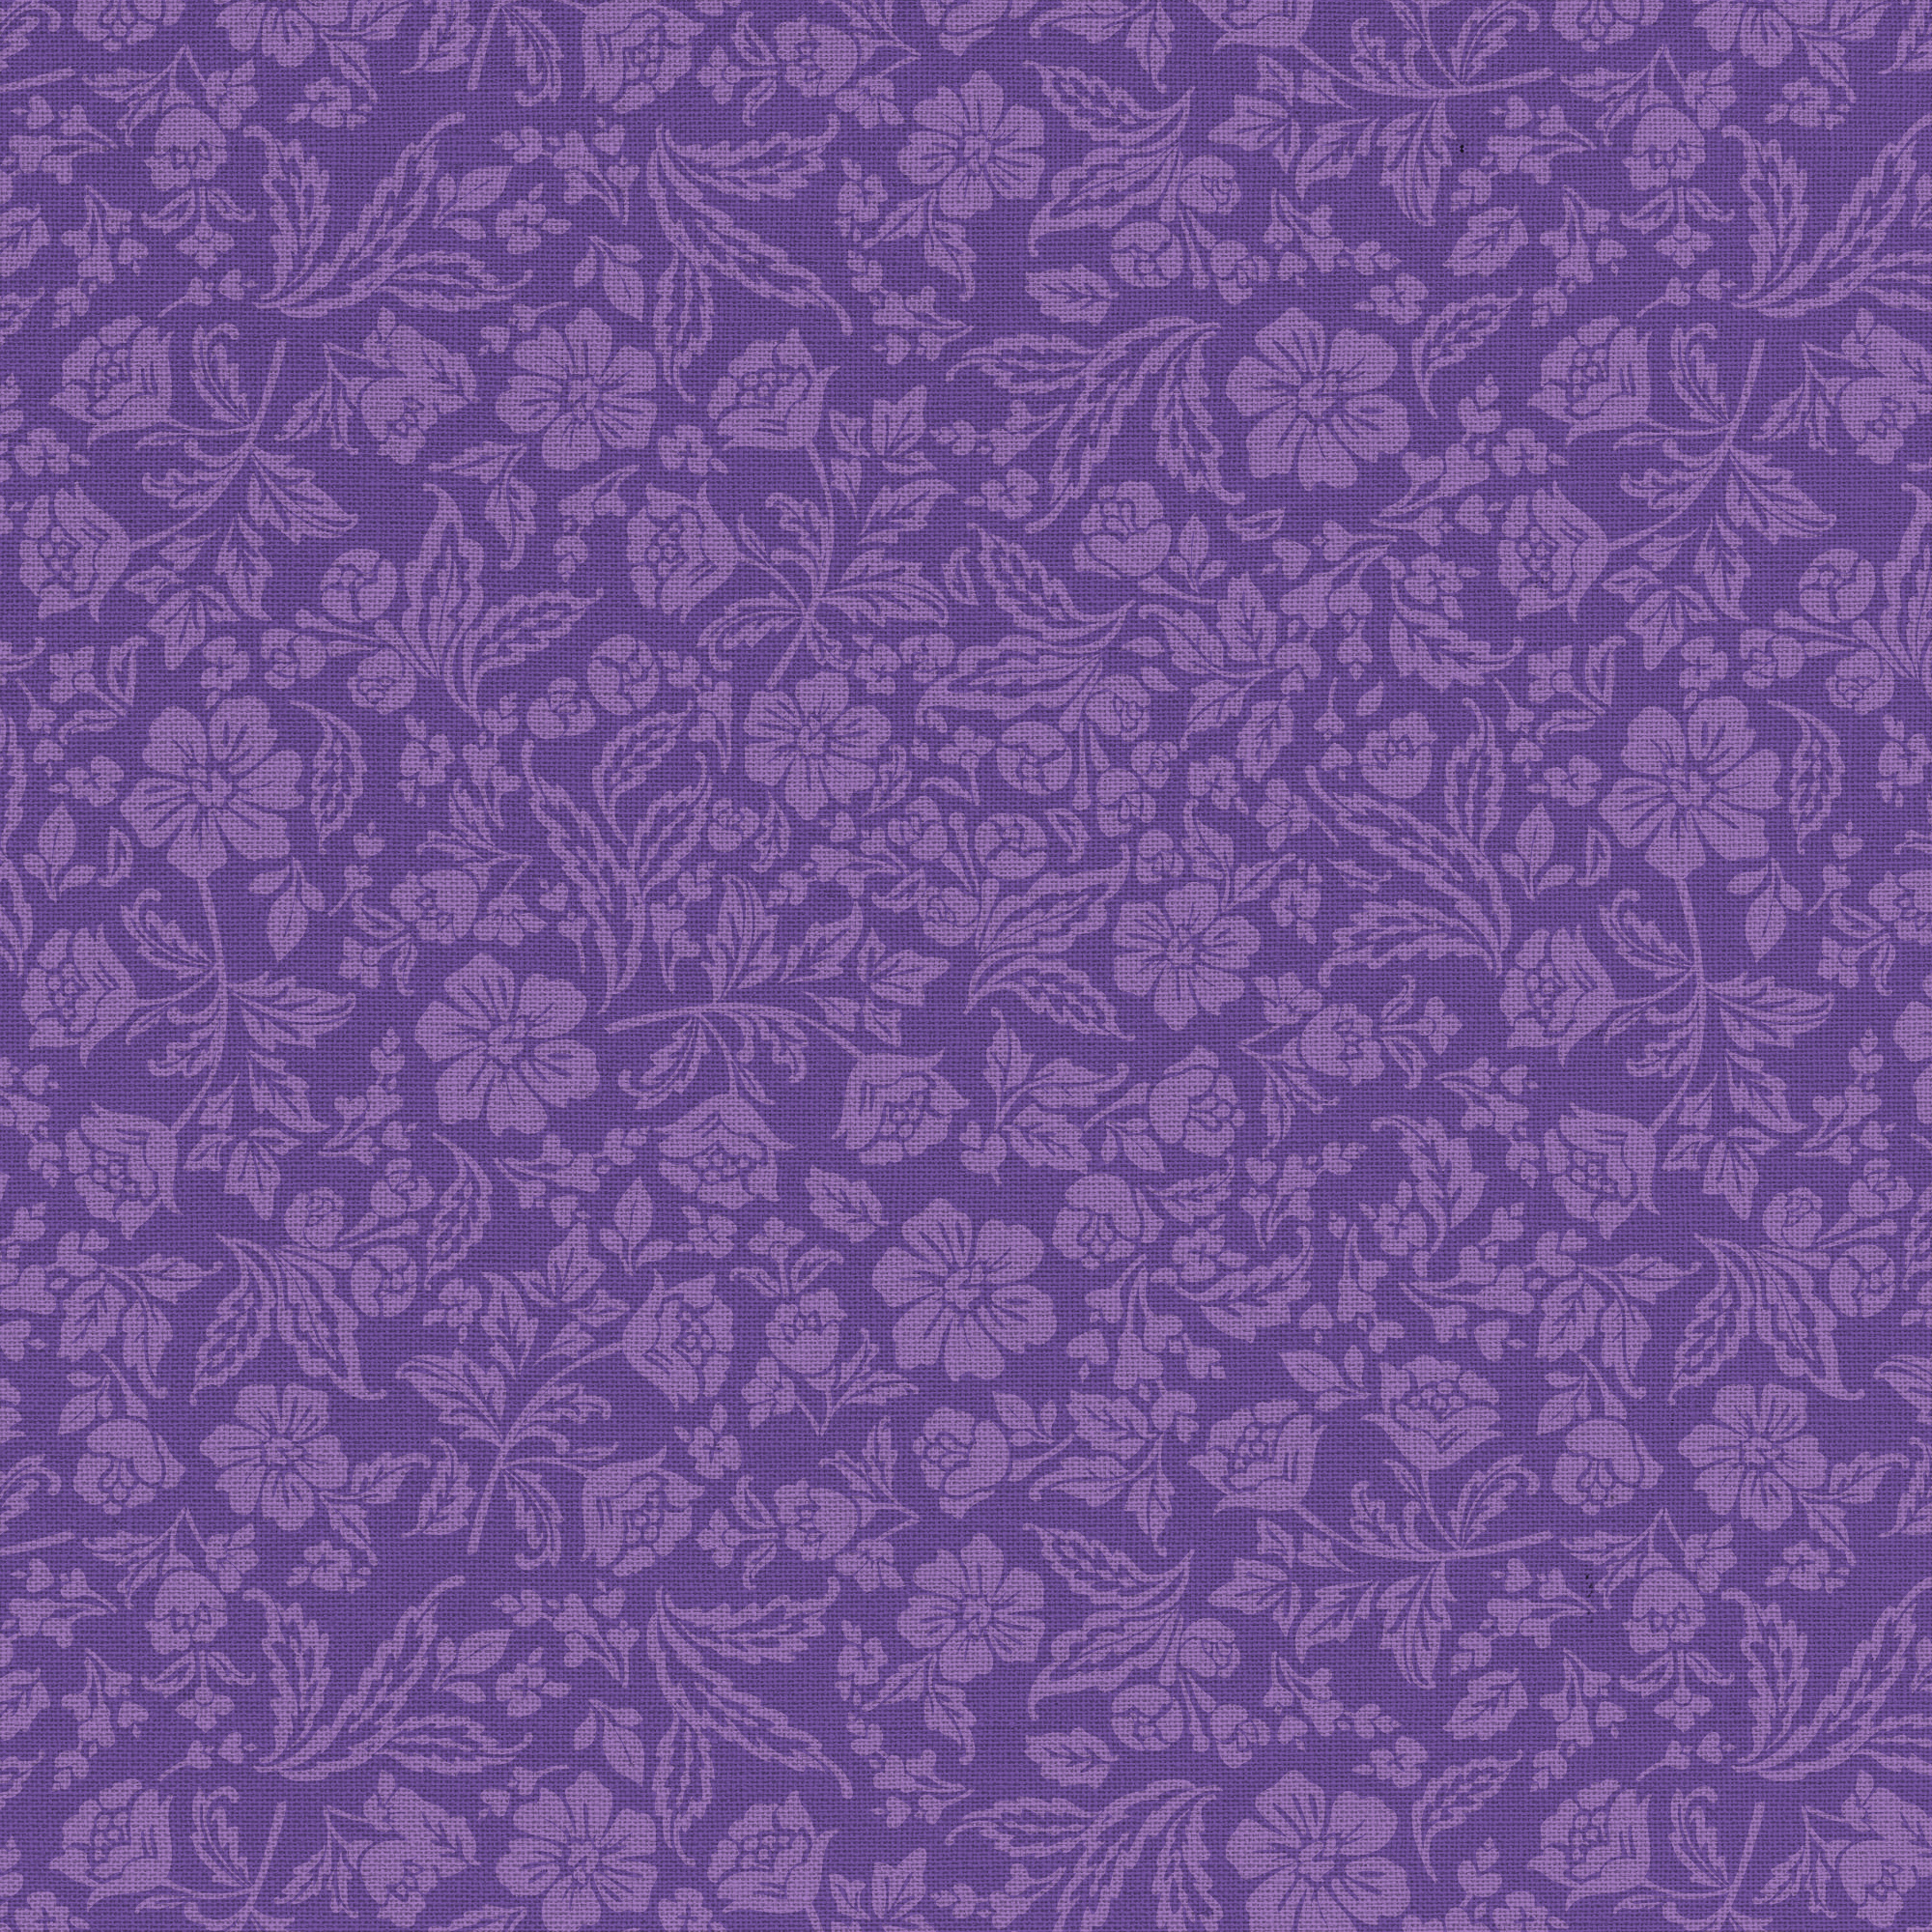 Waverly Inspirations 44" Cotton Paris Floral Coordinate Sewing & Craft Fabric by the Yard, Purple - image 1 of 2